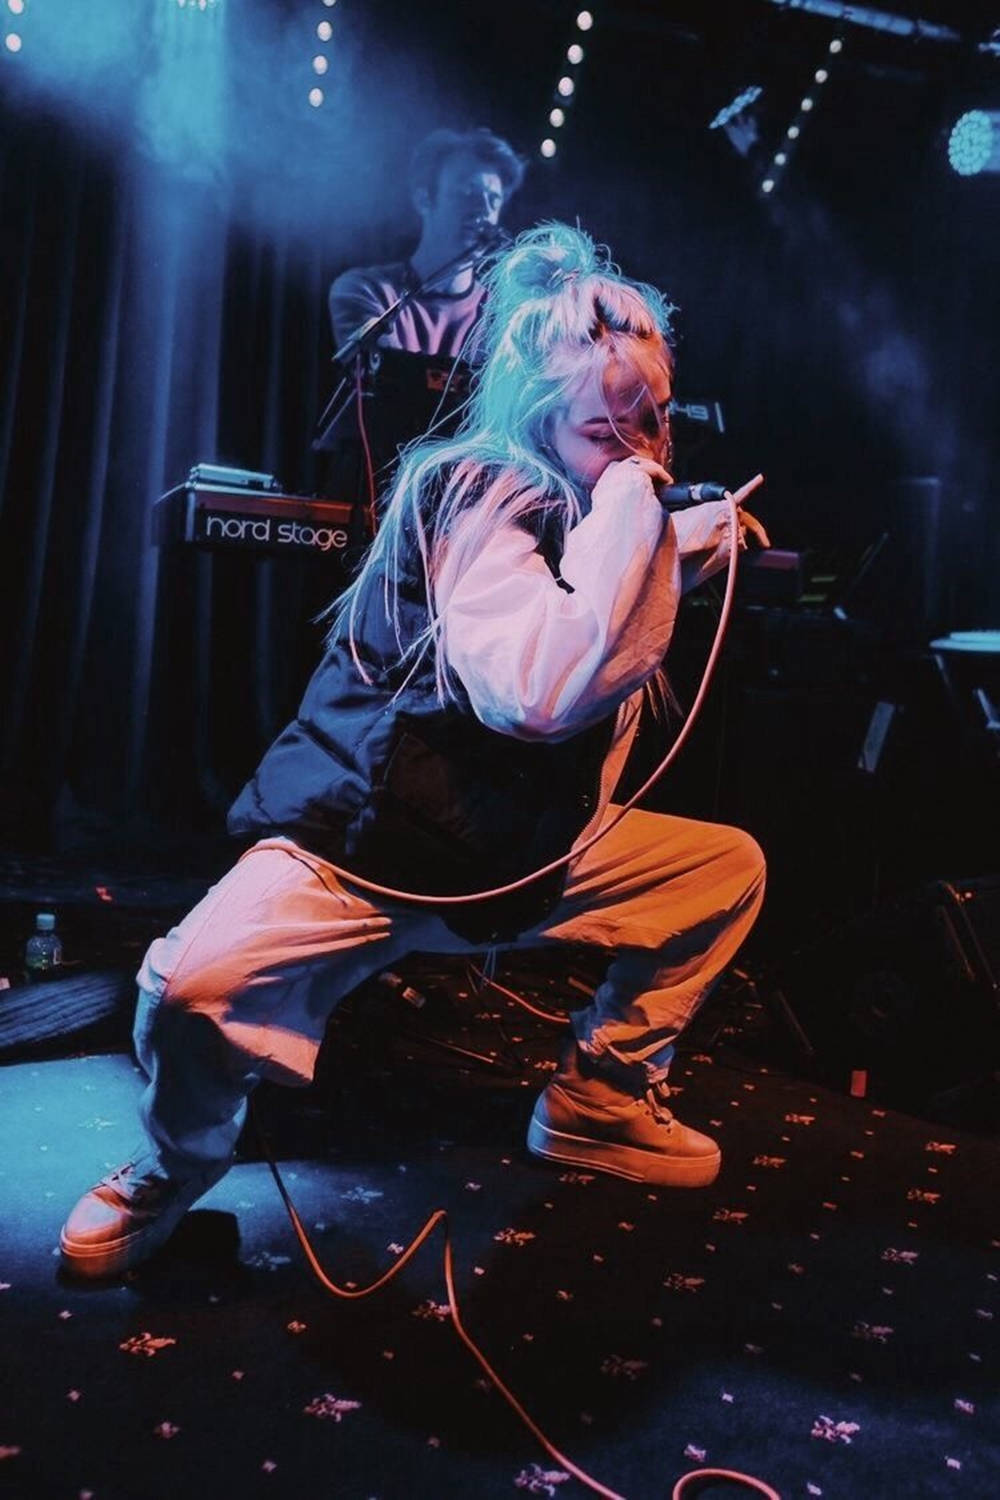 Aesthetic Billie Eilish Performing With Band Background